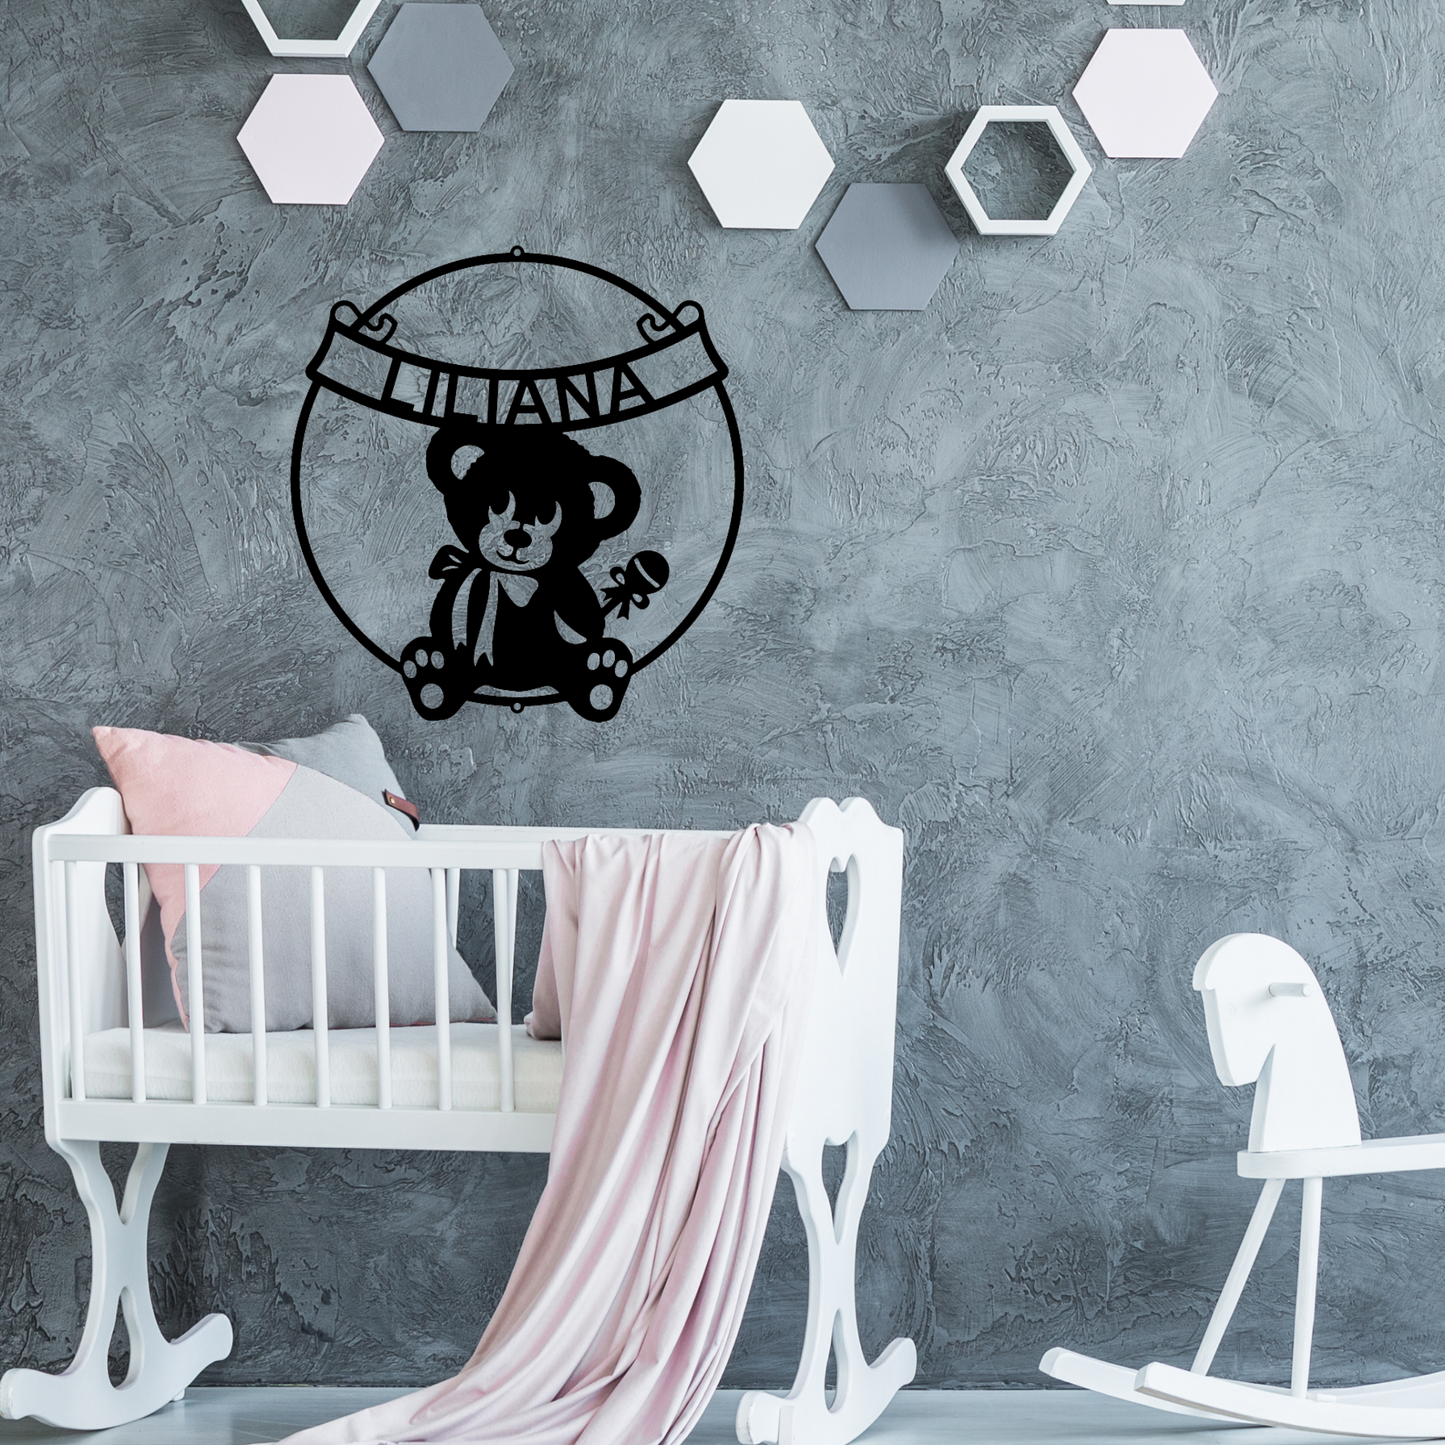 Personalized Nursery Sign with Custom Text, Teddy Bear with Rattle, Metal Monogram, Nursery Decor, Metal Wall Art, Gift for Baby Shower